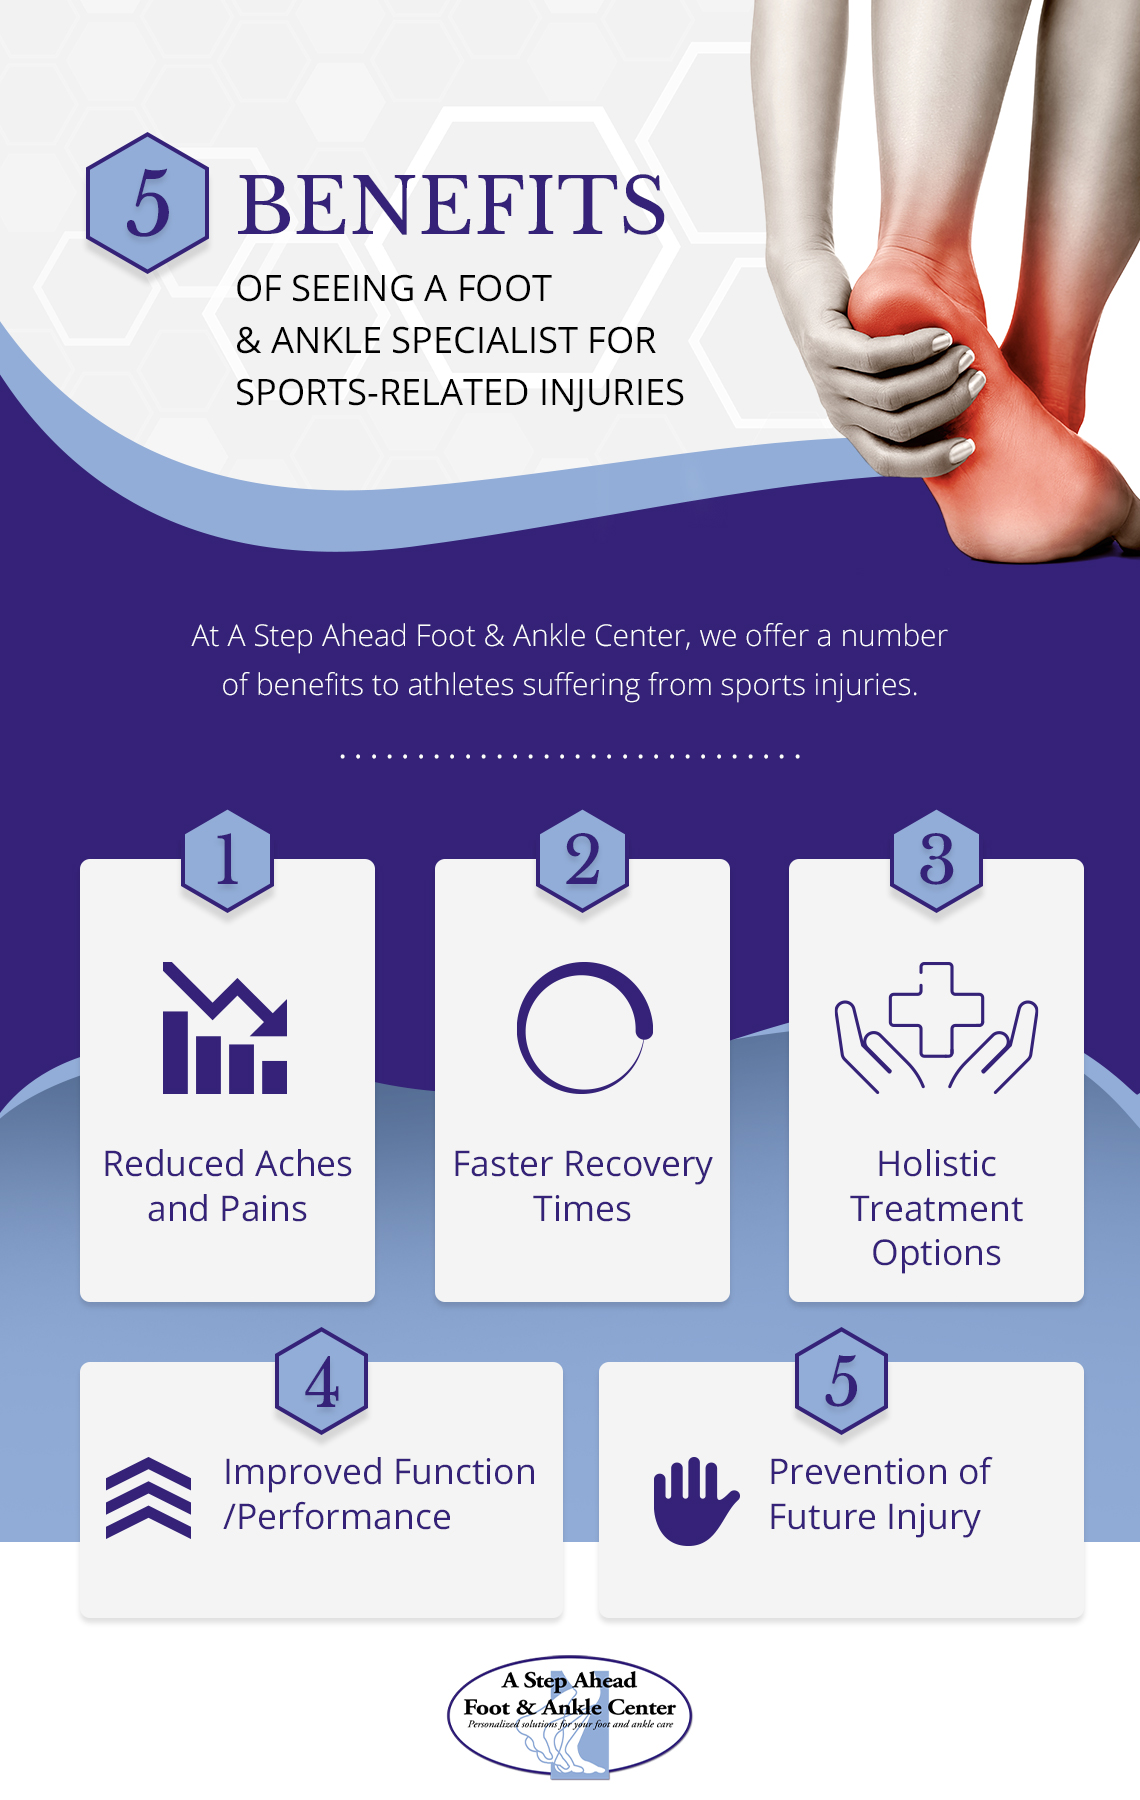 Single-Img-5-Benefits-of-Seeing-a-Foot-and-Ankle-Specialist-for-Sports-Related-Injuries-5fc9513902644 (1)